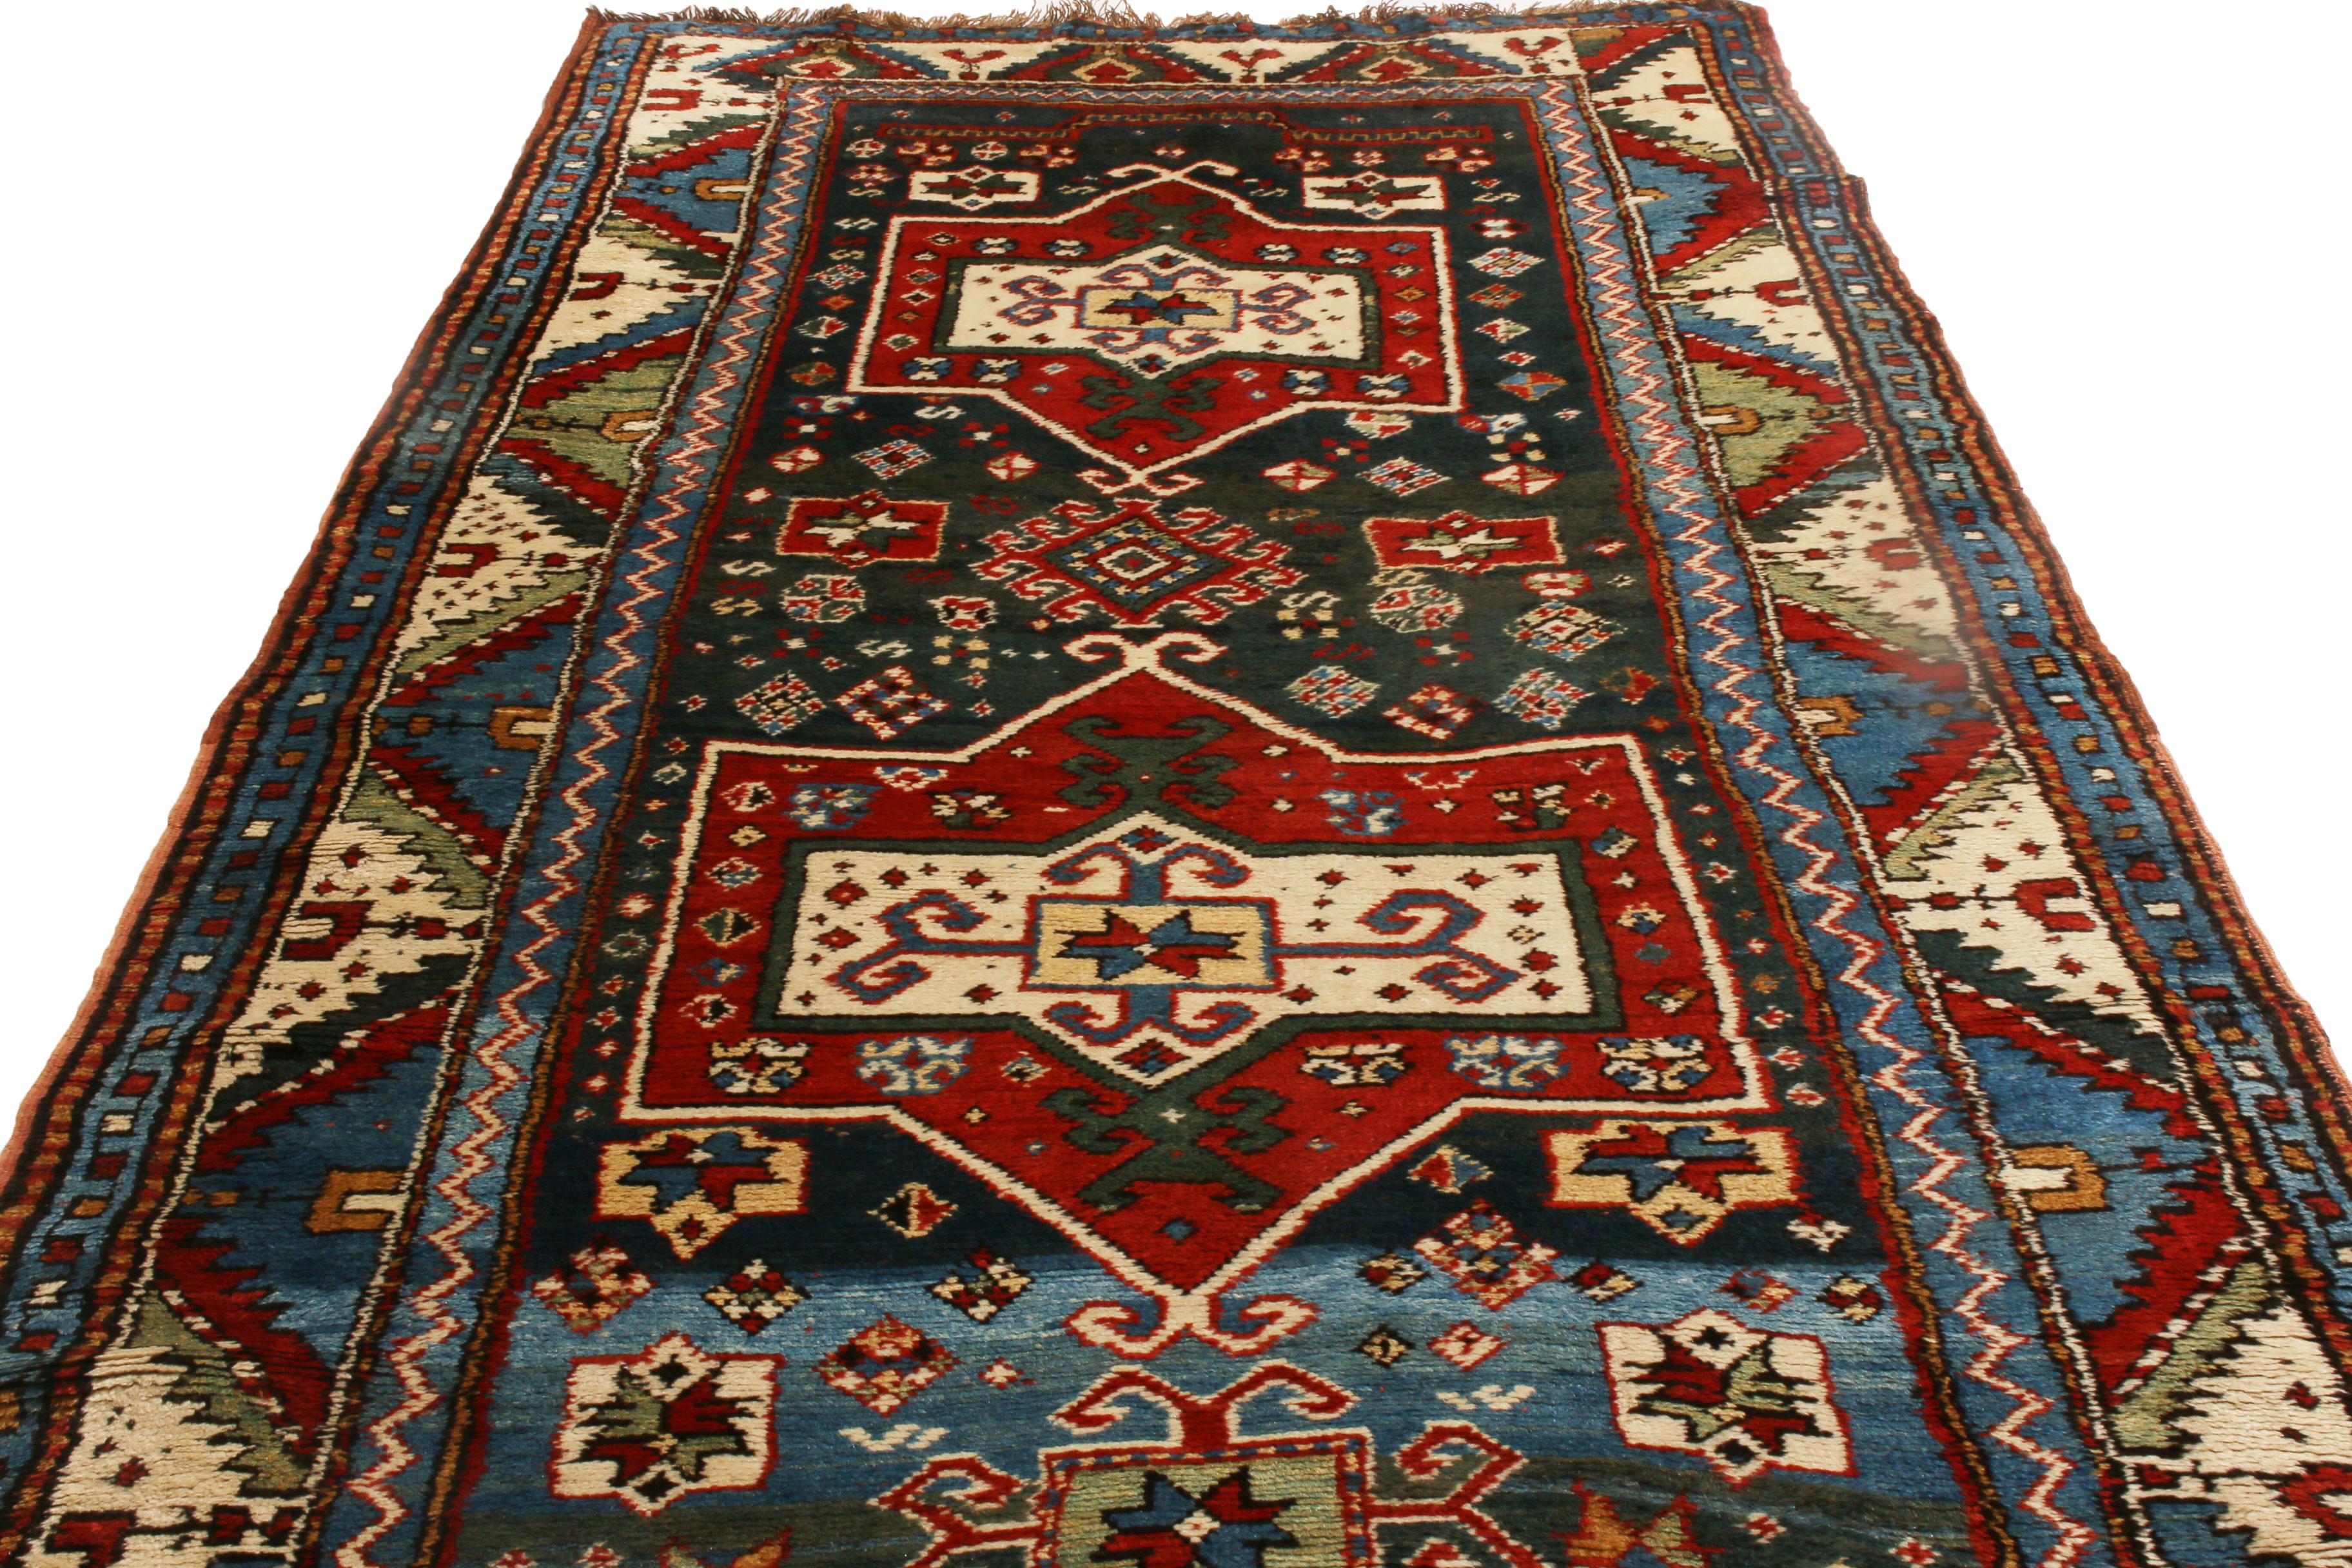 Originating from Russia between 1890-1900, this antique Shirvan runner has one of the widest varieties of eastern symbols, including eight-pointed stars, elibelinde, ram’s horns, Goz, and hooks among many more. hand knotted in high-quality wool,